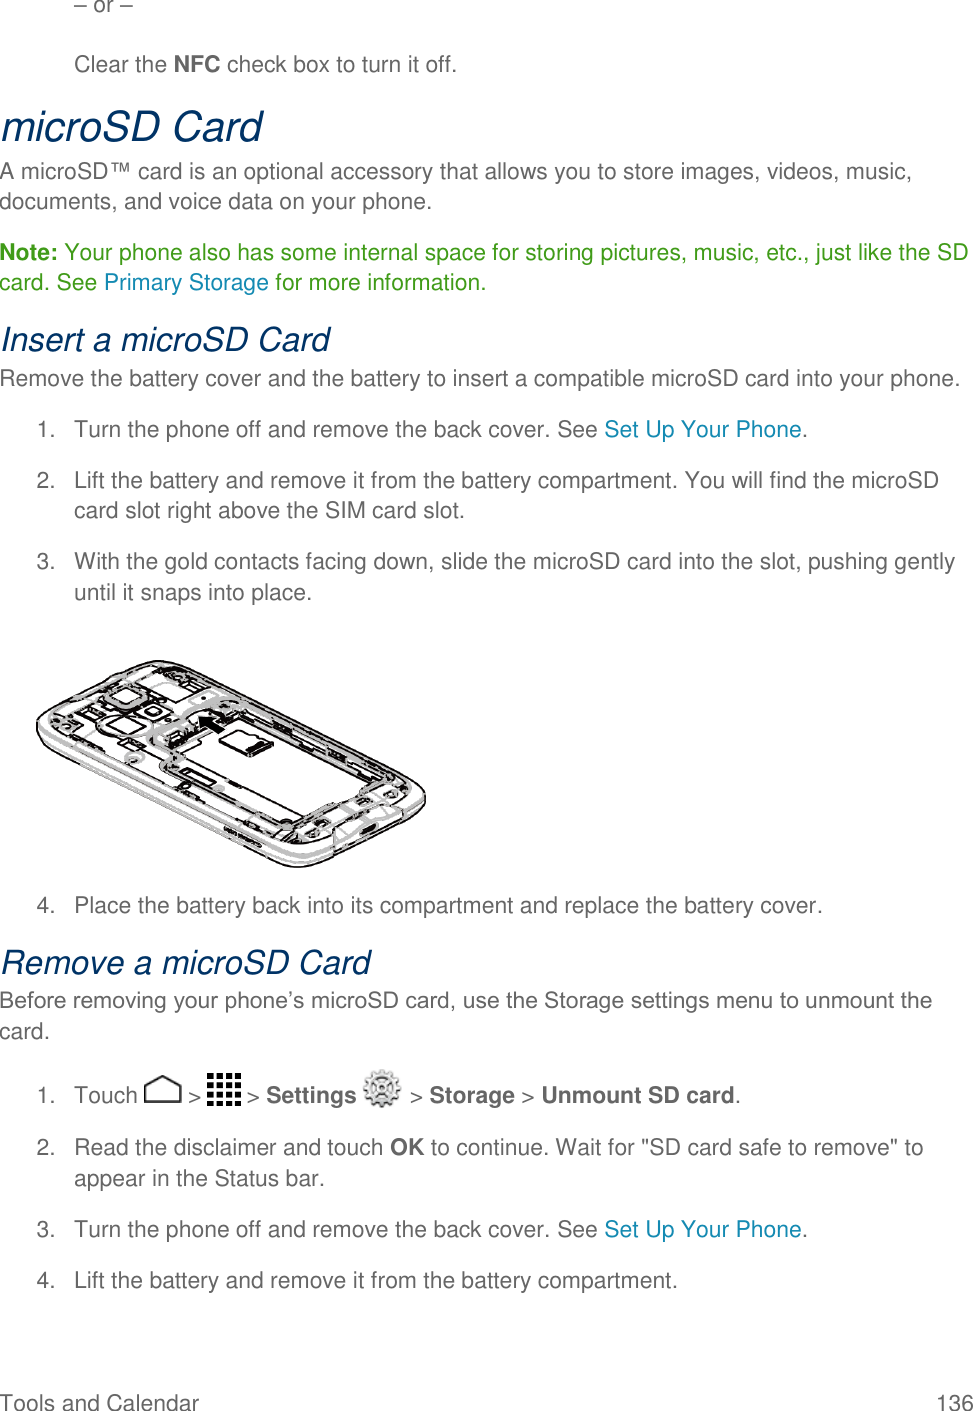 Tools and Calendar  136 – or –  Clear the NFC check box to turn it off. microSD Card A microSD™ card is an optional accessory that allows you to store images, videos, music, documents, and voice data on your phone. Note: Your phone also has some internal space for storing pictures, music, etc., just like the SD card. See Primary Storage for more information. Insert a microSD Card Remove the battery cover and the battery to insert a compatible microSD card into your phone. 1.  Turn the phone off and remove the back cover. See Set Up Your Phone. 2.  Lift the battery and remove it from the battery compartment. You will find the microSD card slot right above the SIM card slot. 3.  With the gold contacts facing down, slide the microSD card into the slot, pushing gently until it snaps into place.     4.  Place the battery back into its compartment and replace the battery cover. Remove a microSD Card Before removing your phone’s microSD card, use the Storage settings menu to unmount the card. 1.  Touch   &gt;   &gt; Settings   &gt; Storage &gt; Unmount SD card. 2.  Read the disclaimer and touch OK to continue. Wait for &quot;SD card safe to remove&quot; to appear in the Status bar. 3.  Turn the phone off and remove the back cover. See Set Up Your Phone. 4.  Lift the battery and remove it from the battery compartment. 